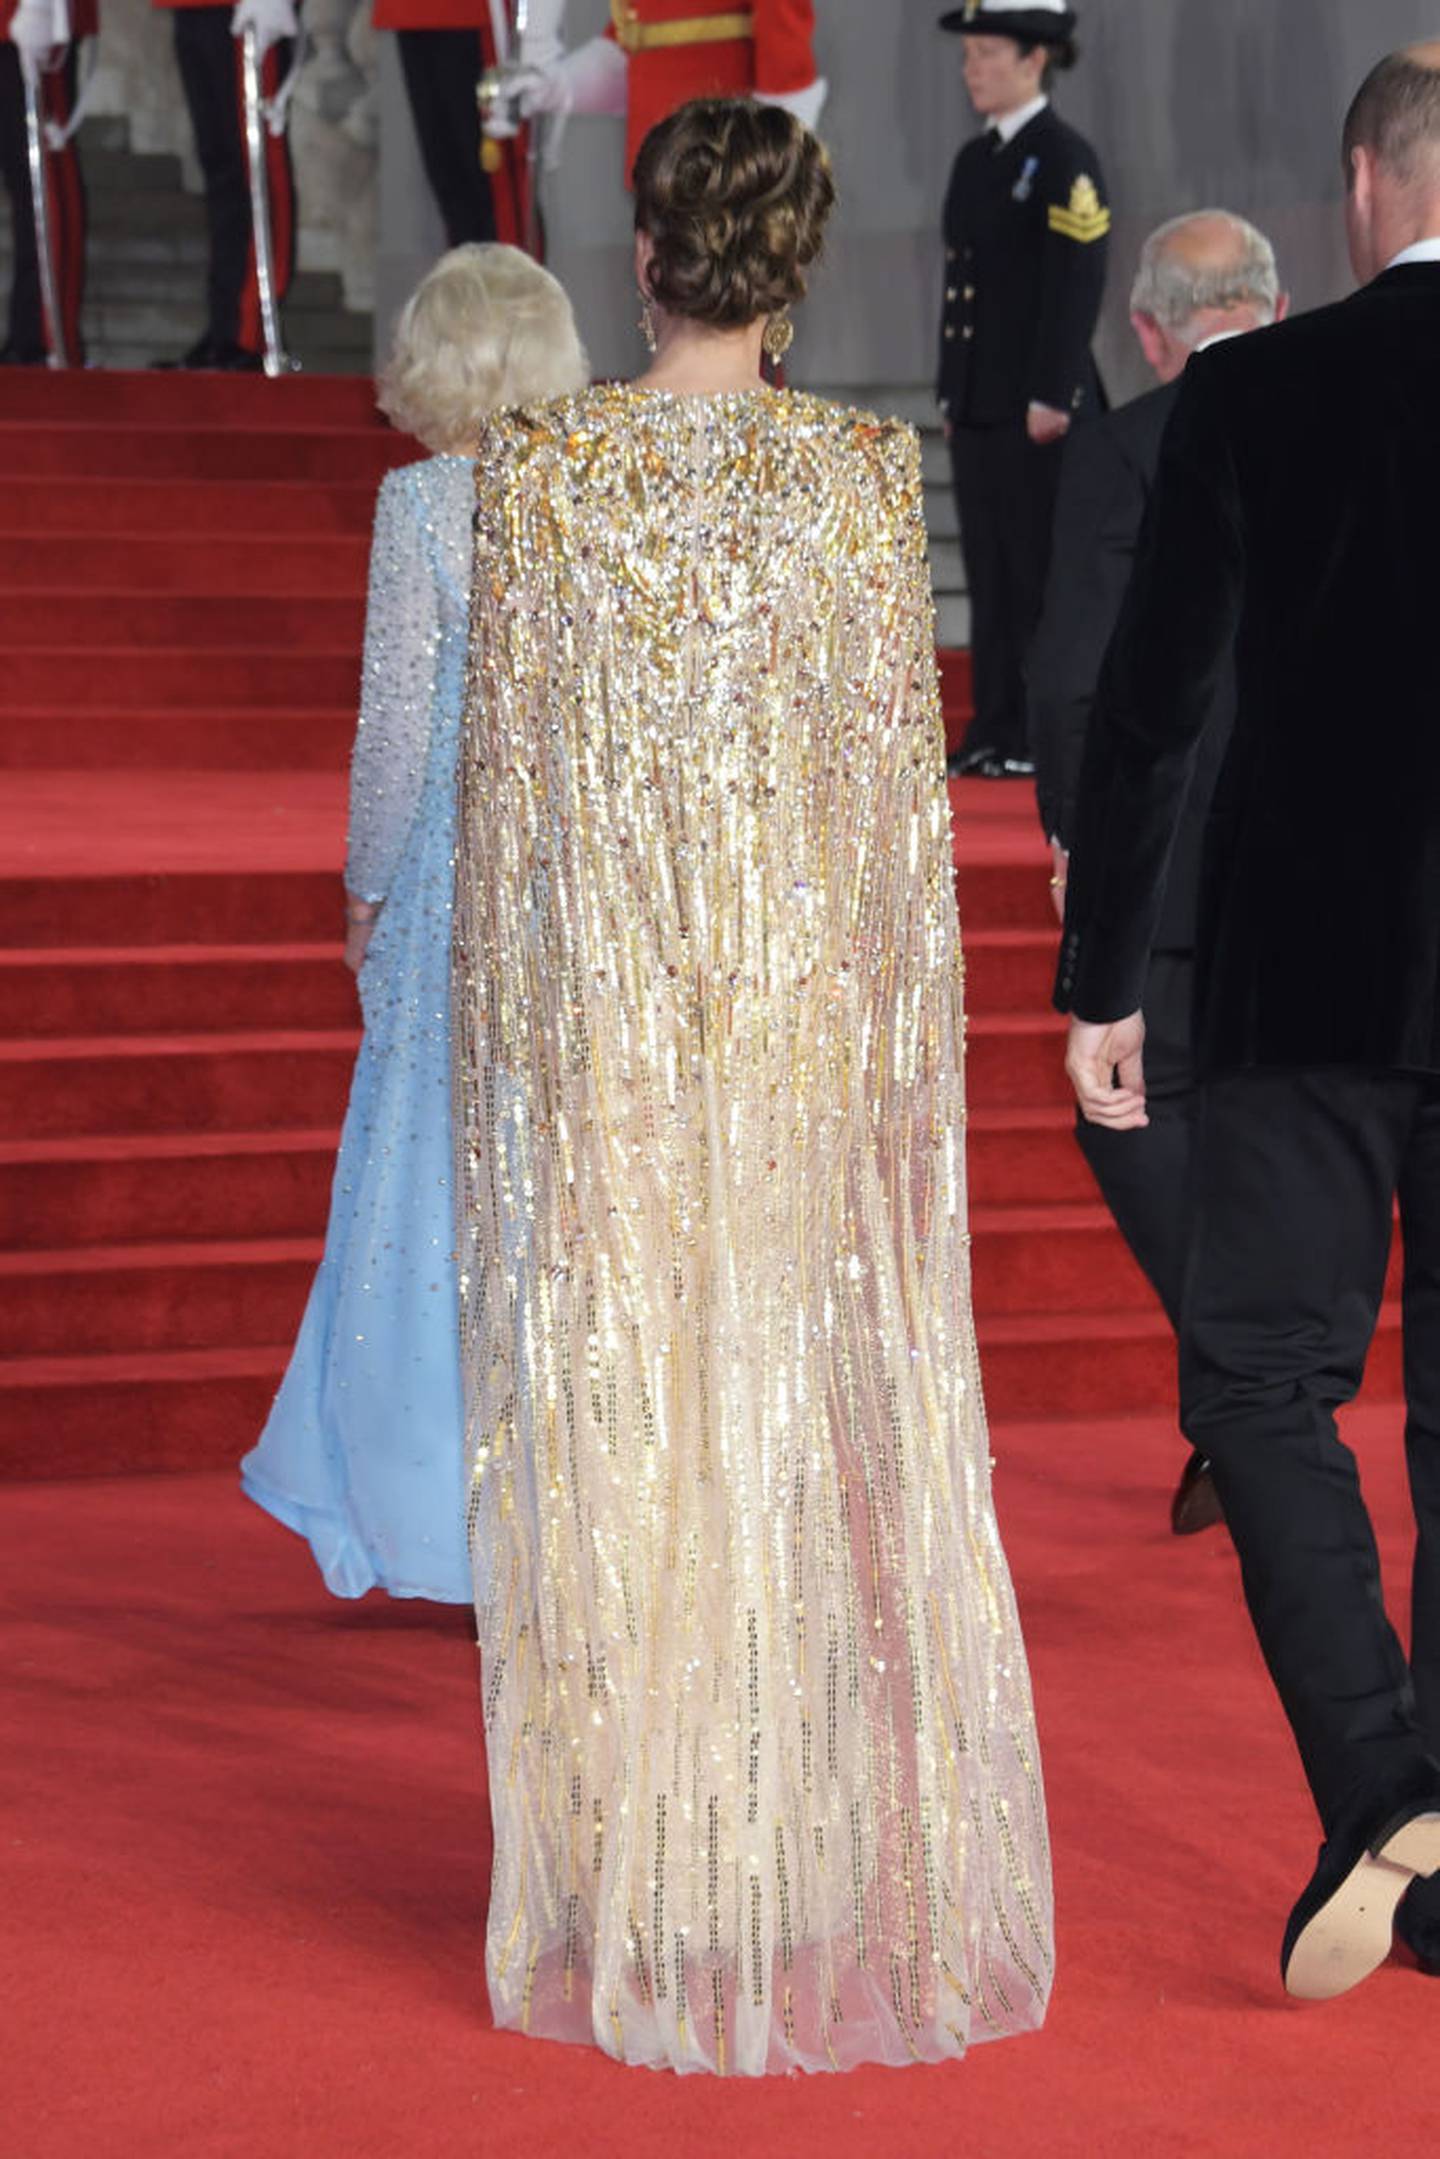 Catherine's Jenny Packham caped gown was embellished with gold sequins. Photo / Getty